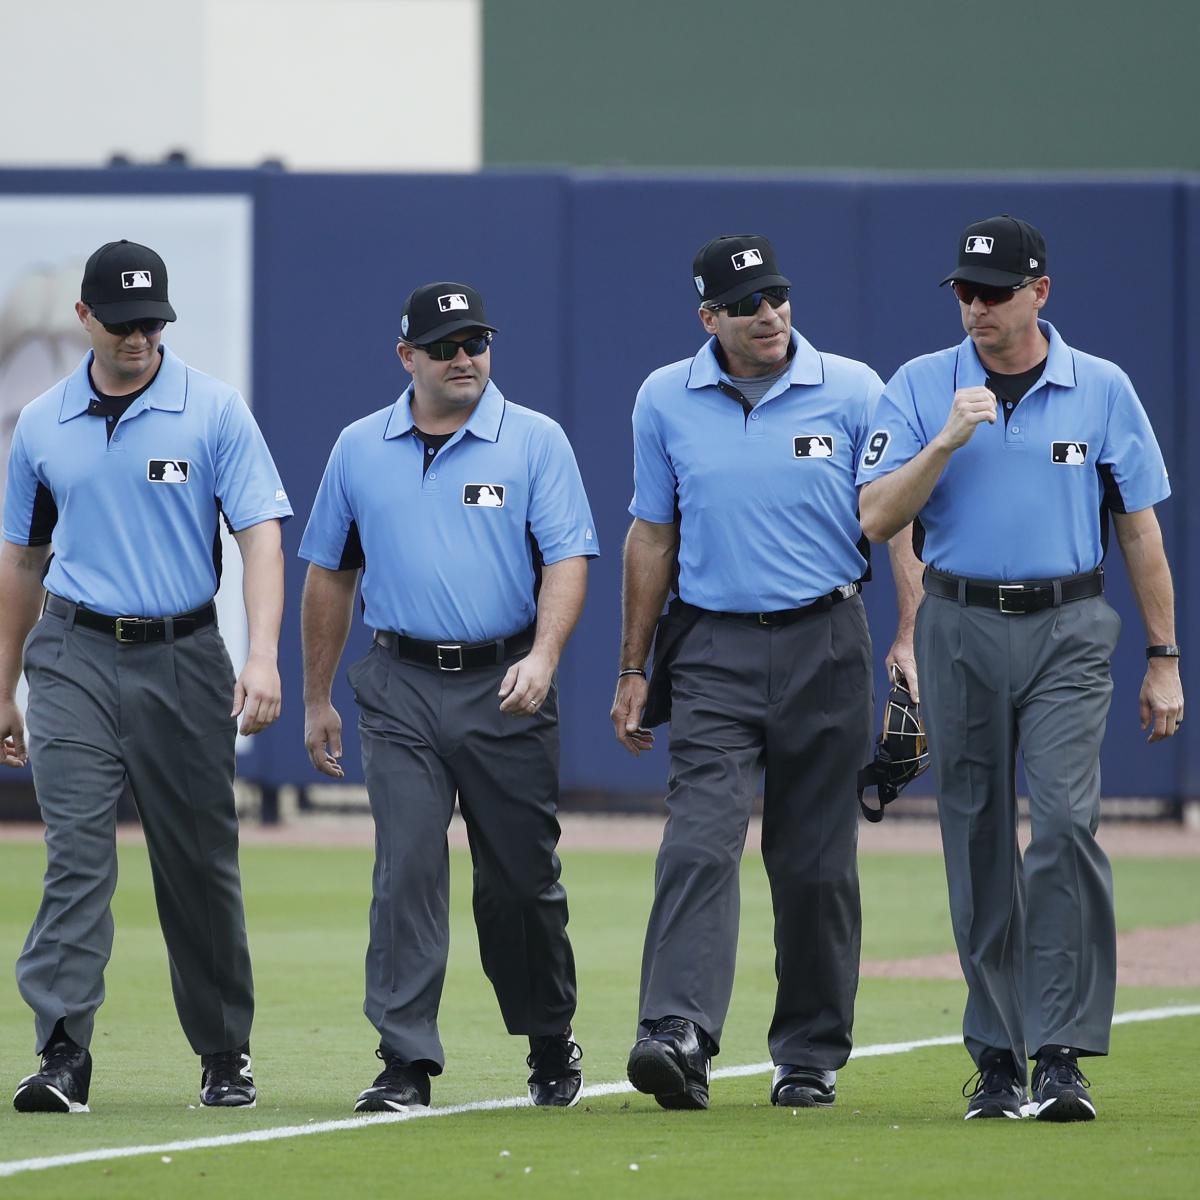 MLB to Experiment with Robot Umpires, More Rule Changes in